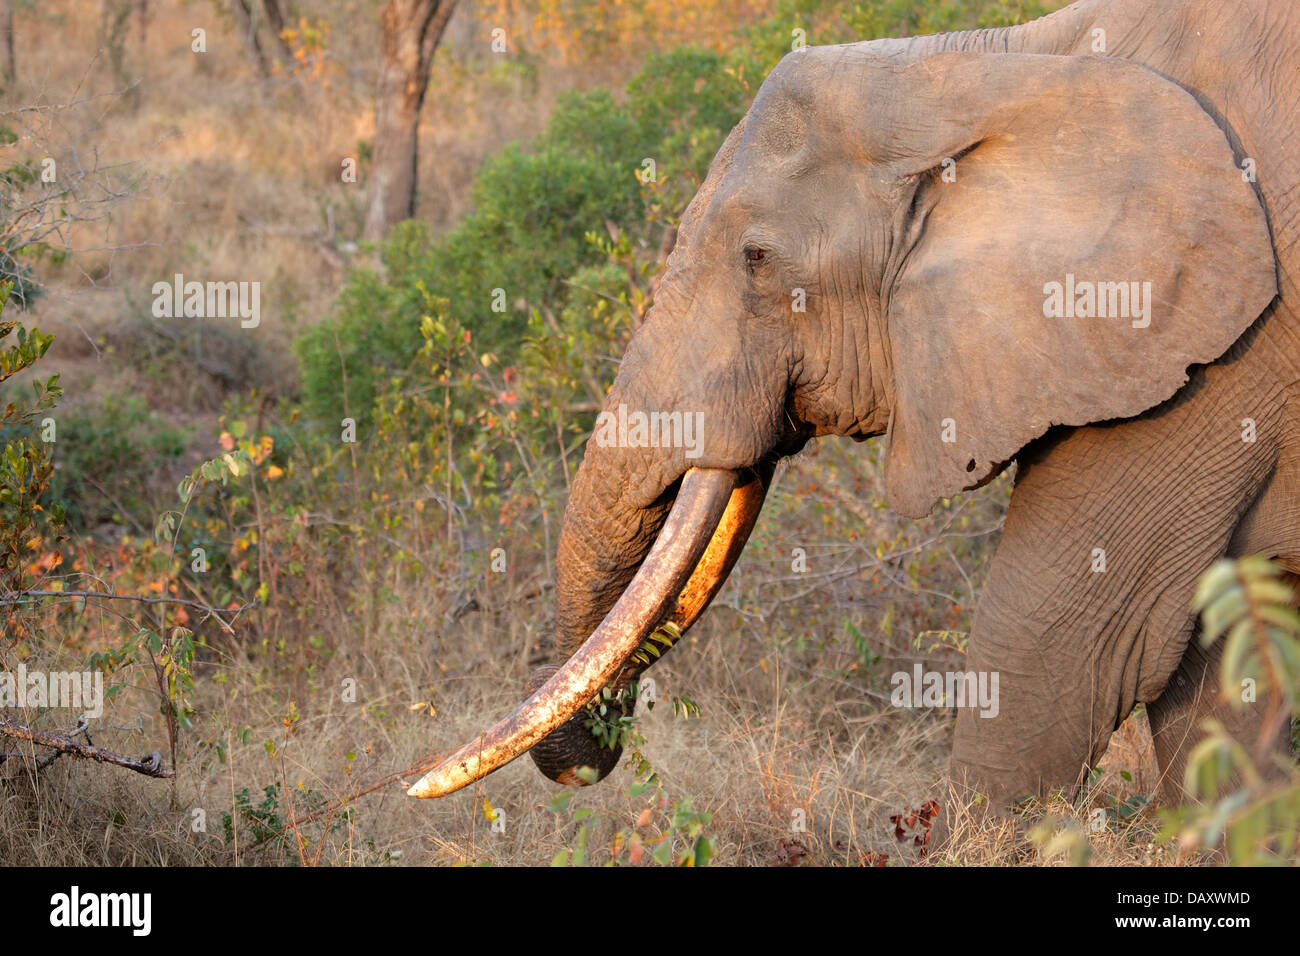 African bull elephant (Loxodonta africana) with large tusks, Sabie-Sand nature reserve, South Africa Stock Photo